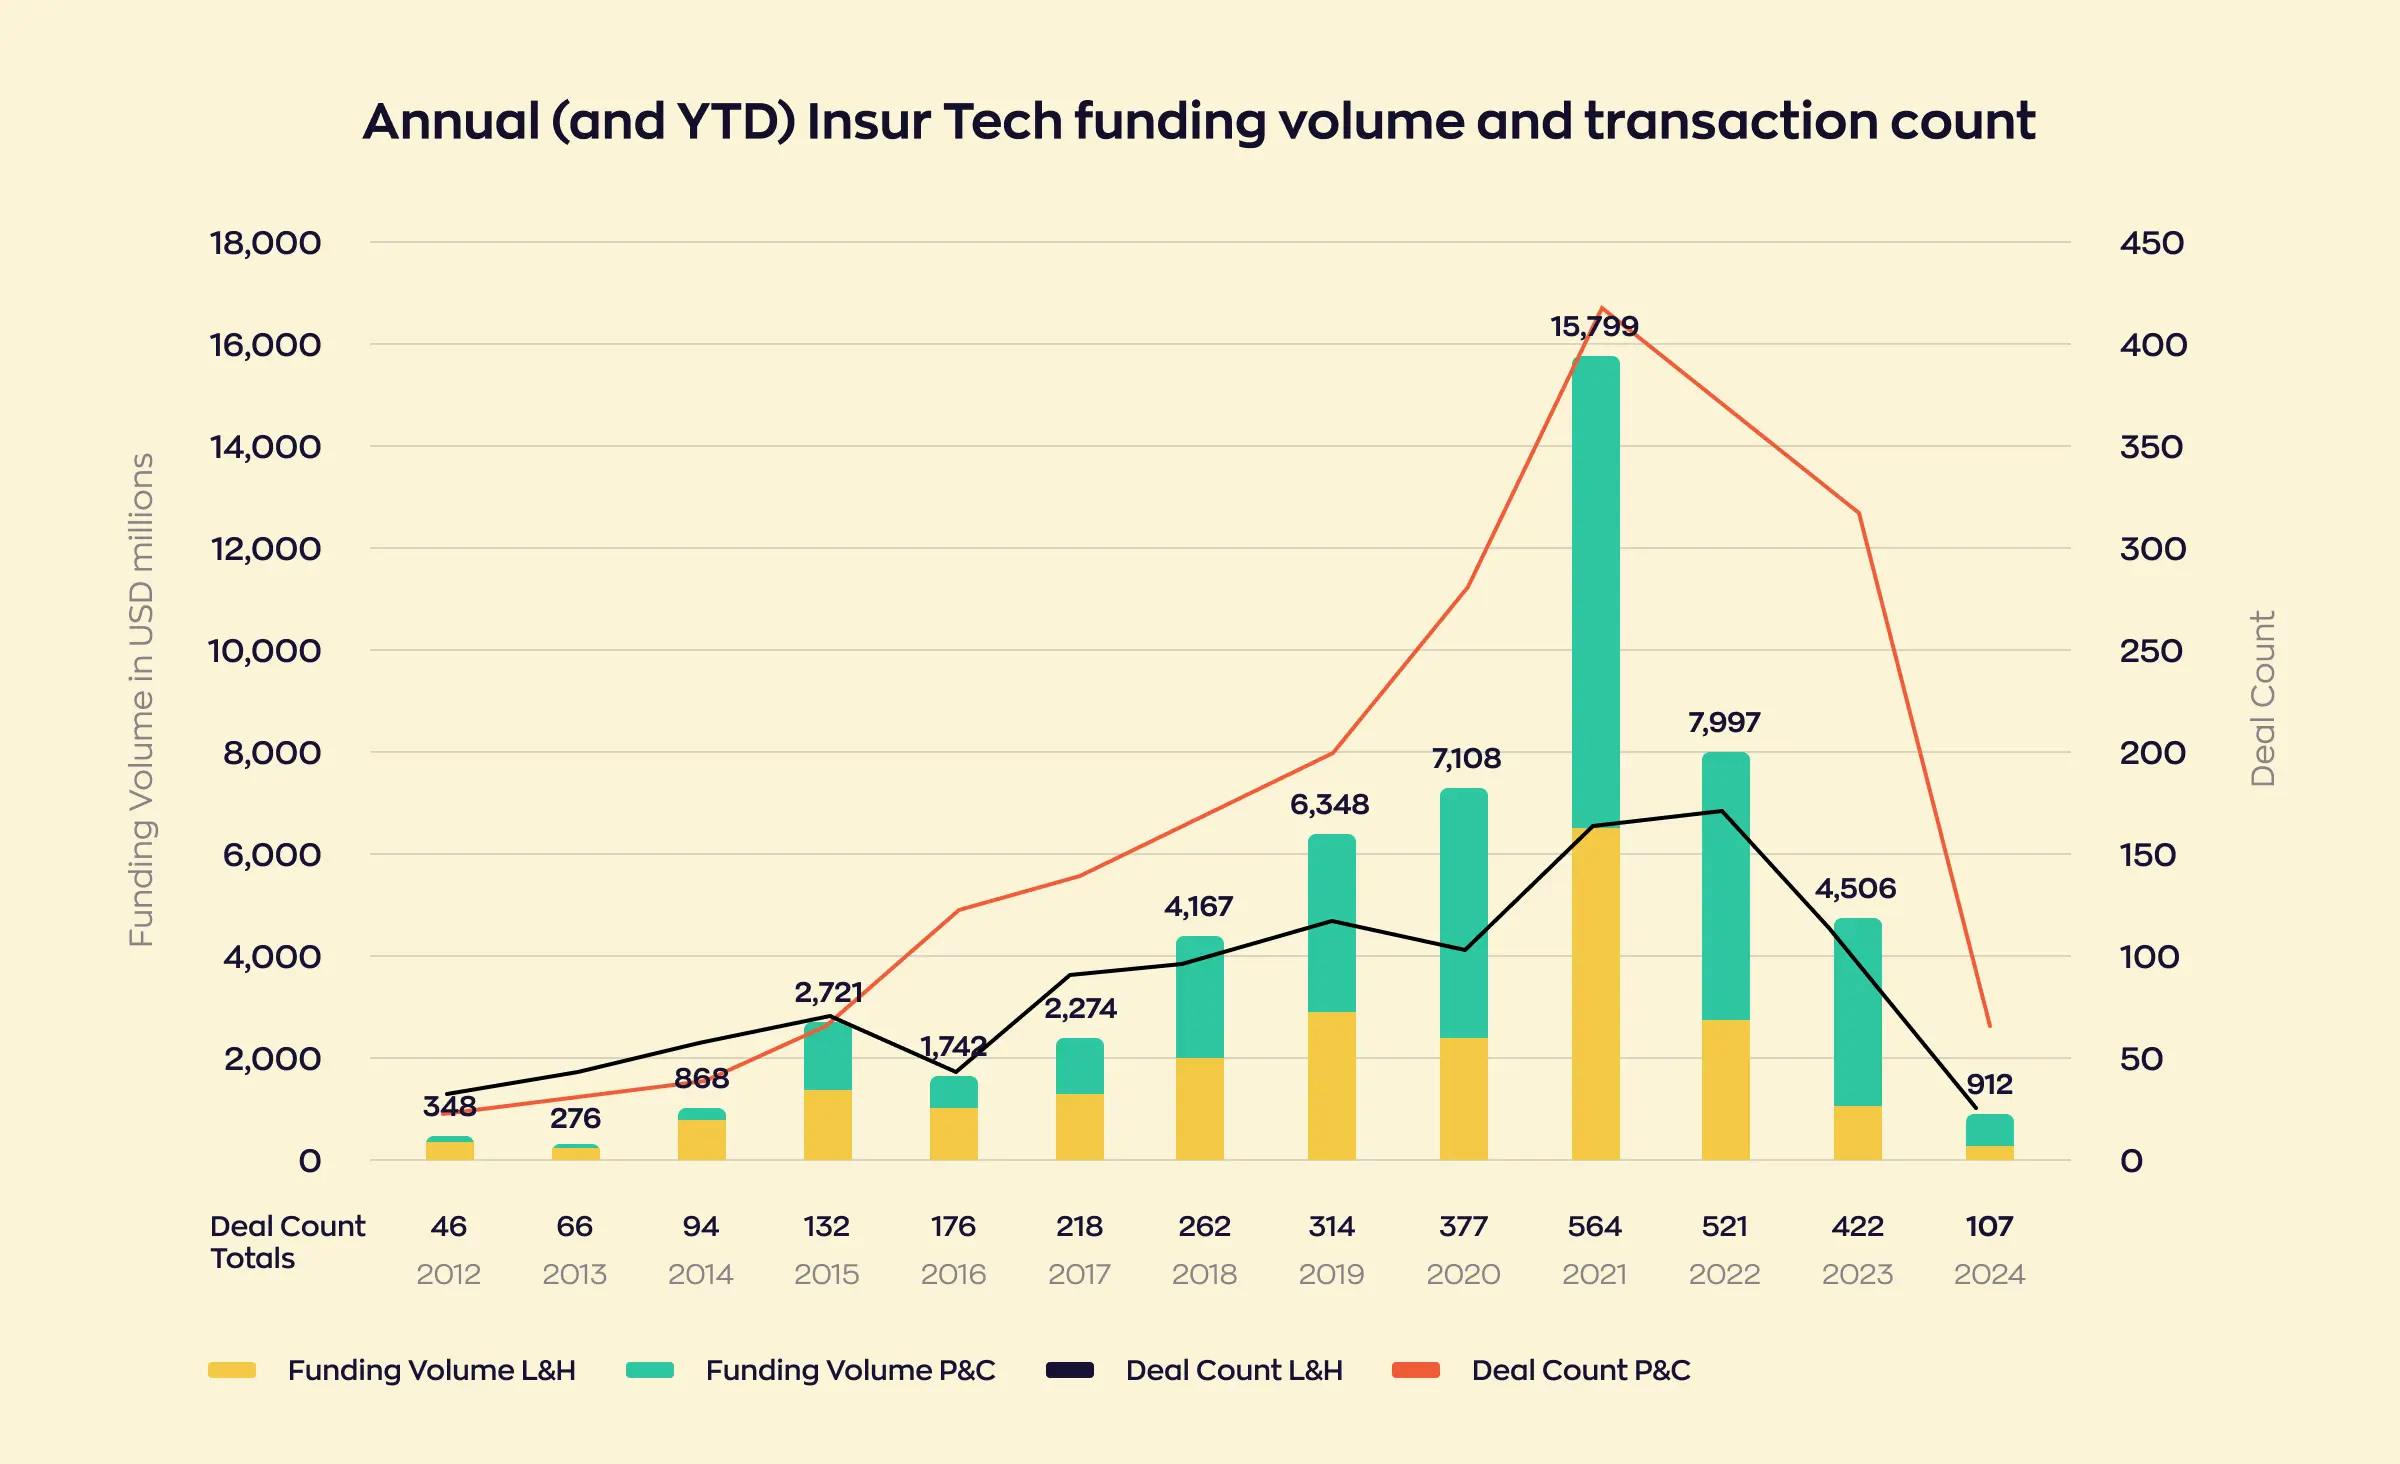 Insurtech investment saw annual growth from $348 million in 2012 to a peak of $15,799 million in 2021. However, investment declined significantly thereafter, reaching $912 million in 2024.